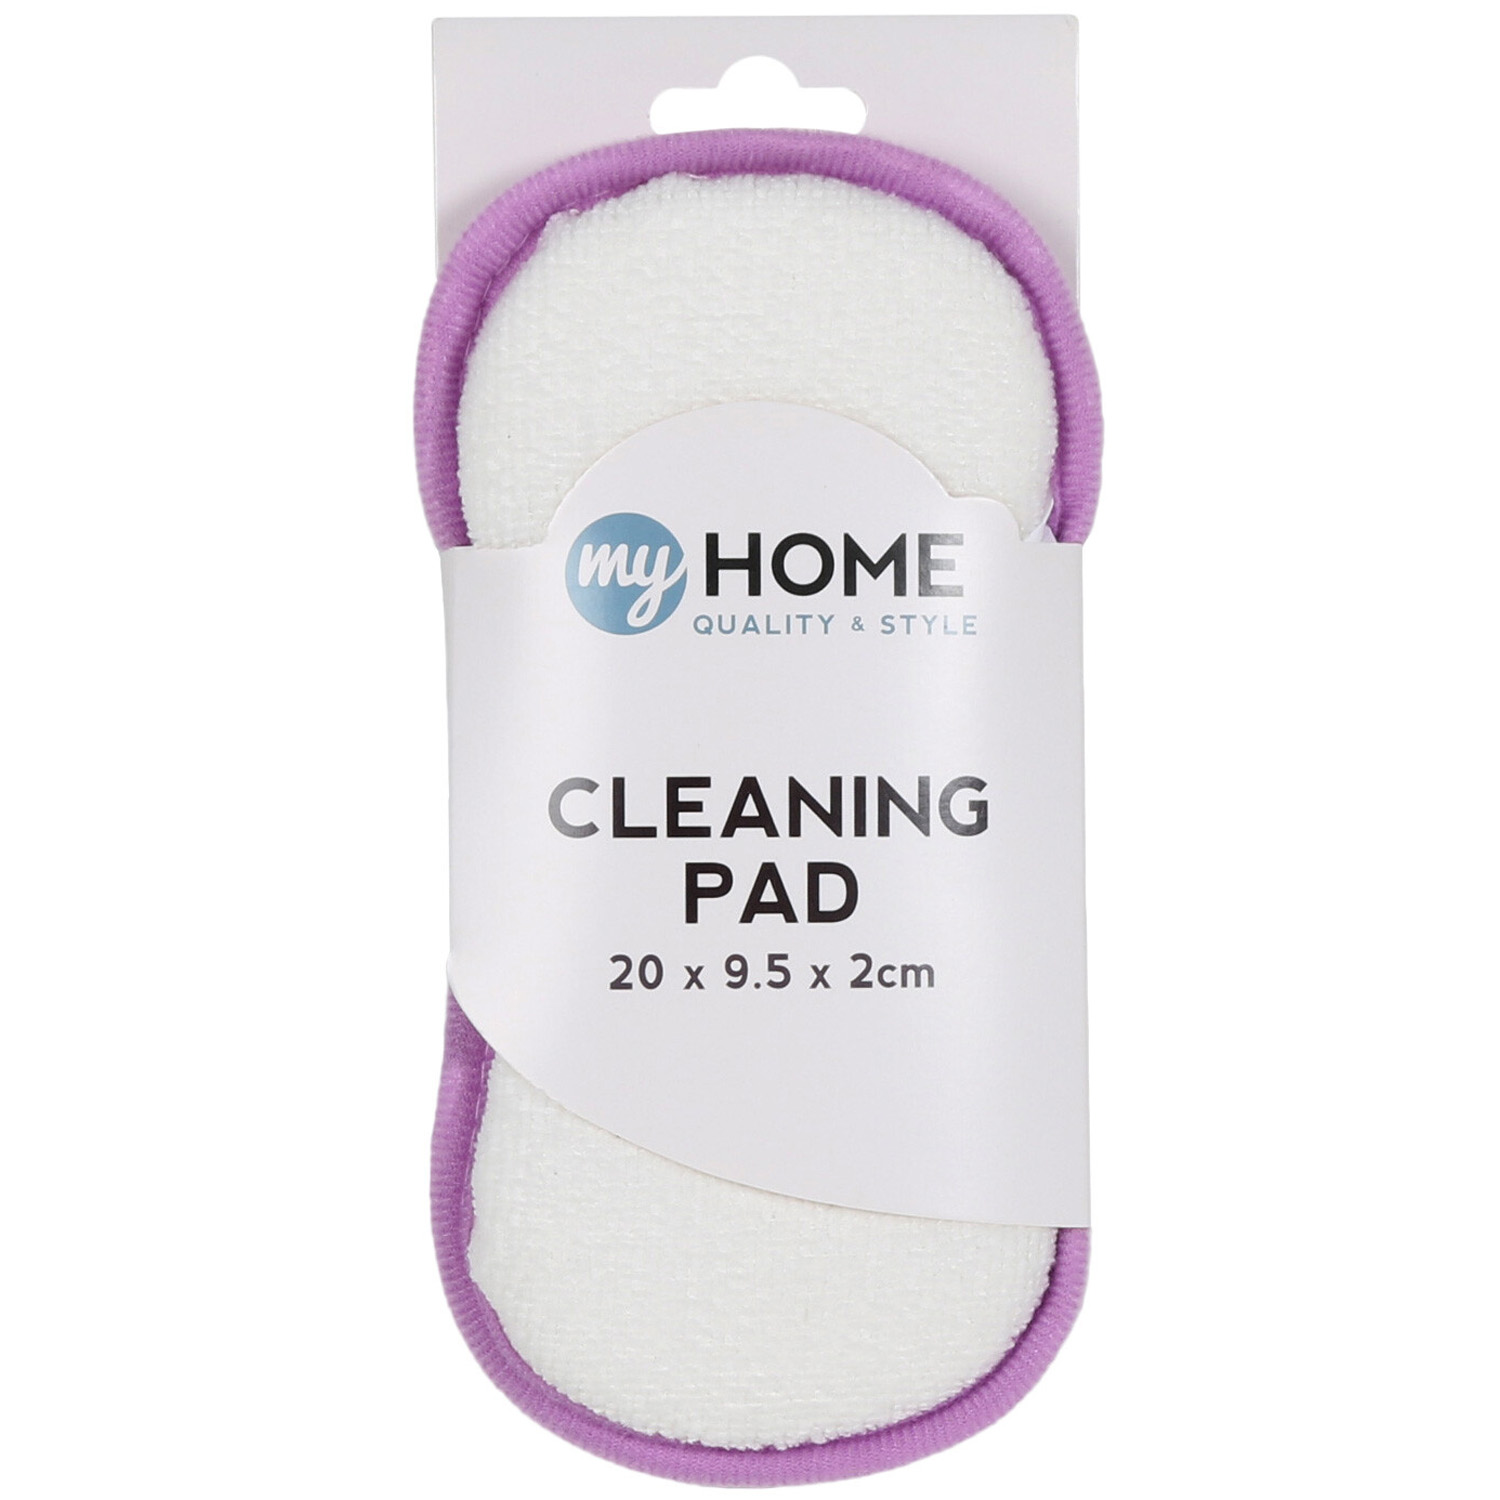 My Home Cleaning Pad Image 1